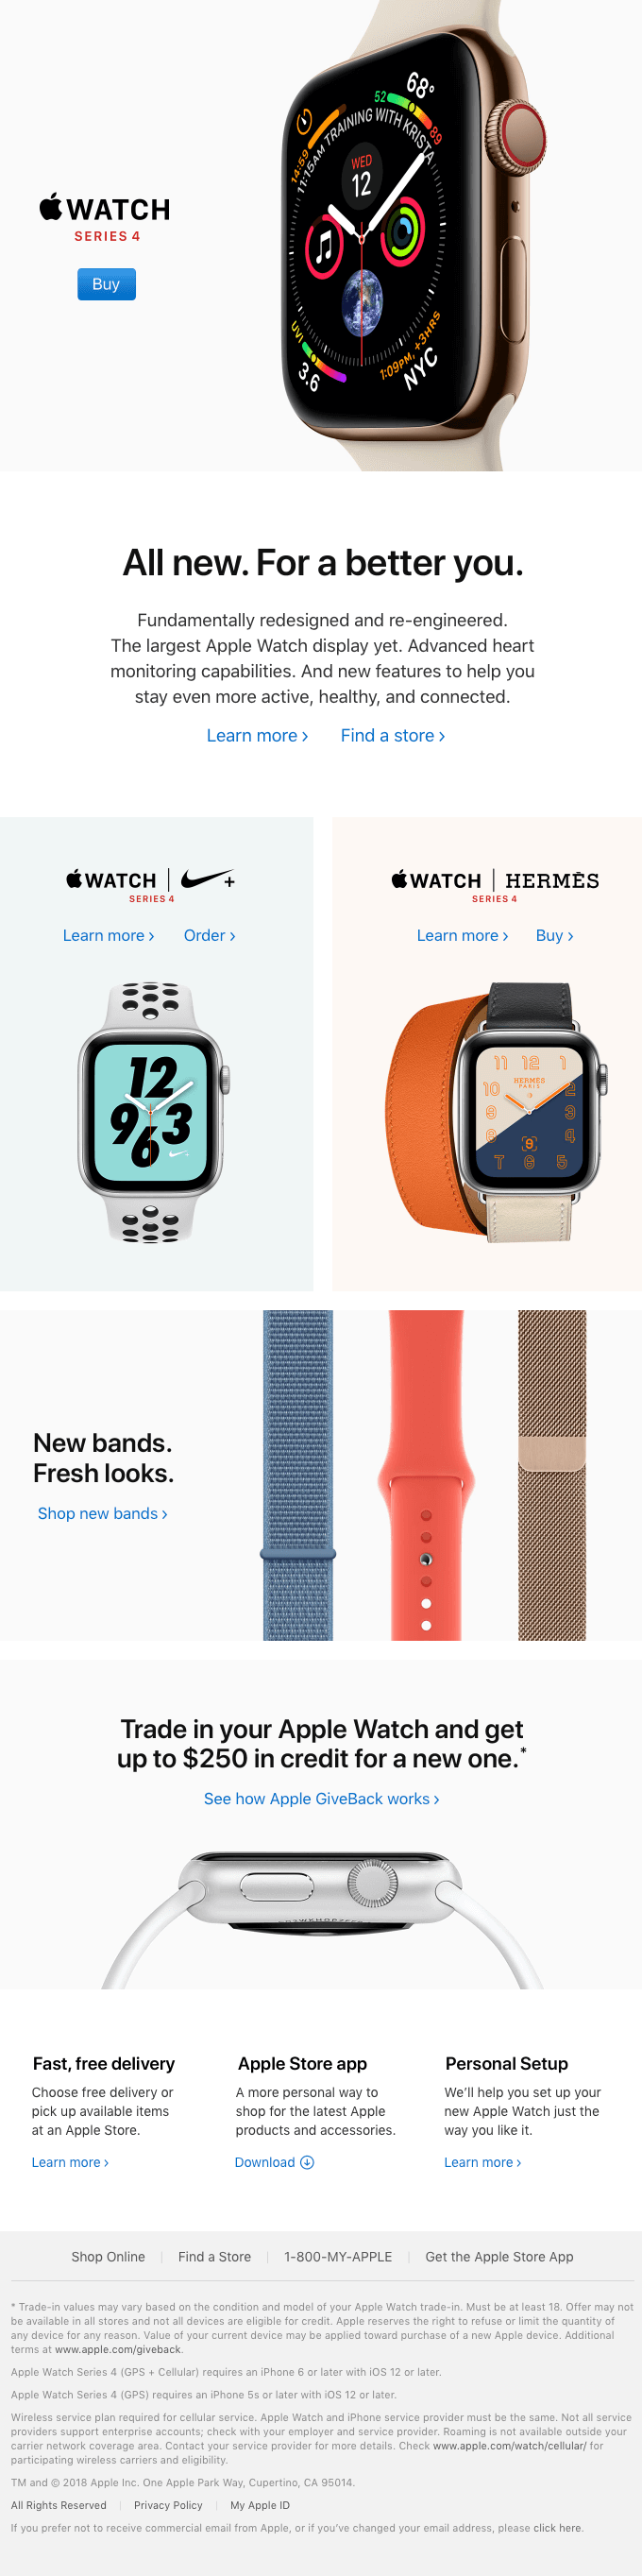 Apple Watch Post purchase stage email